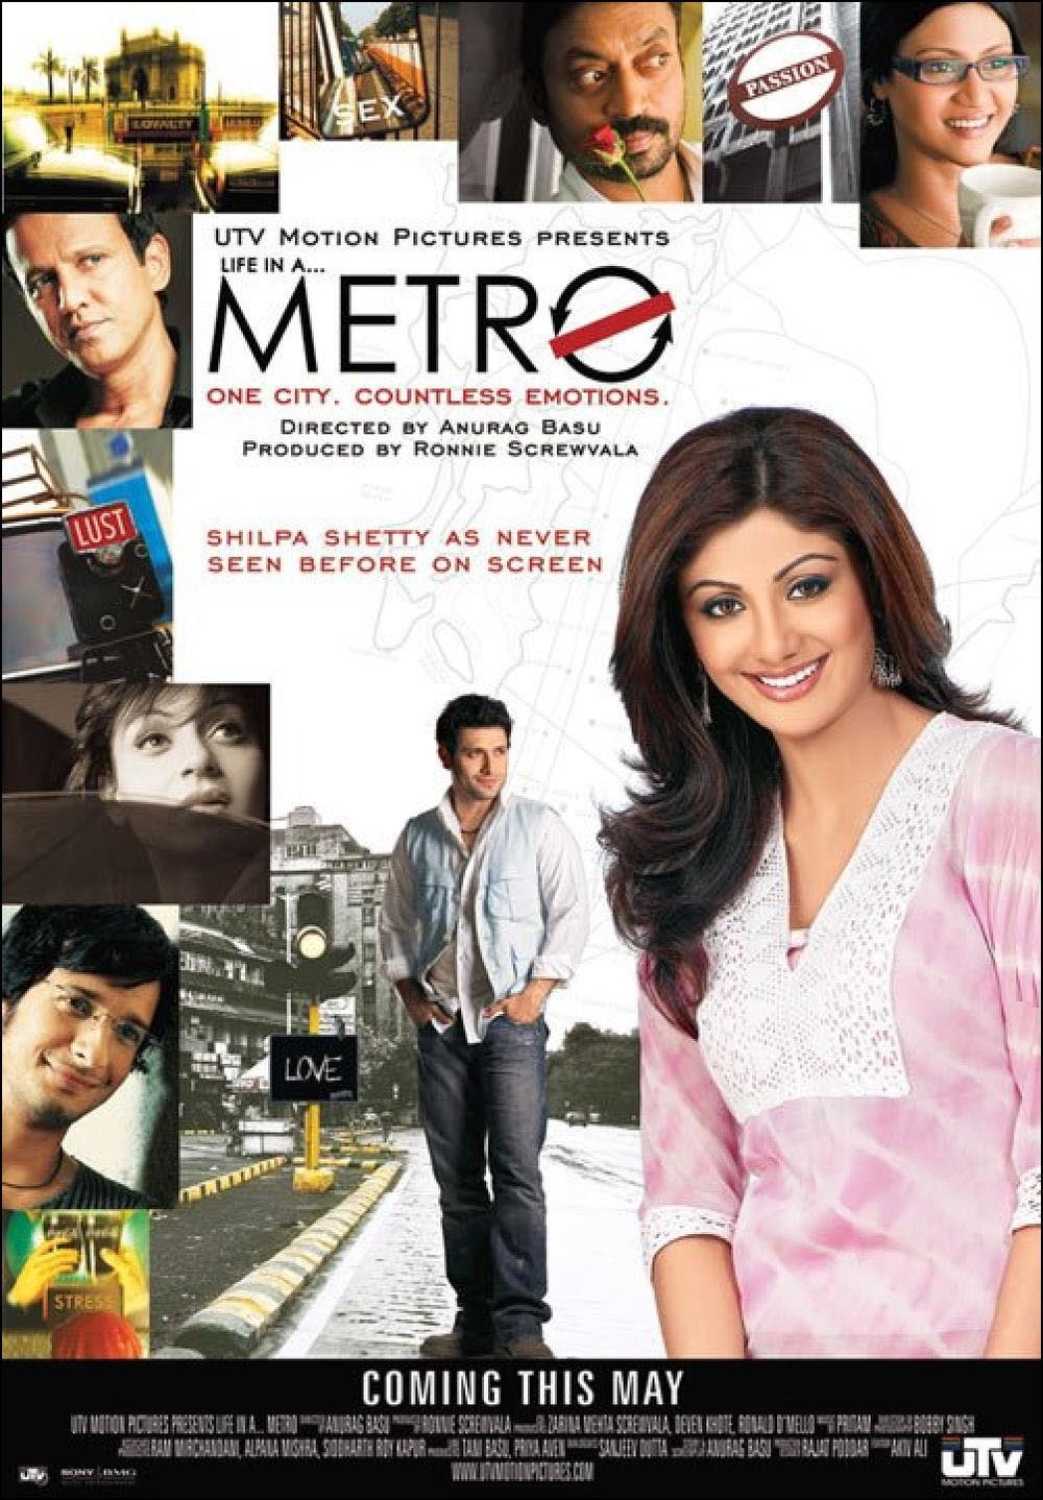 Life In A Metro 2007 1545 Poster.jpg